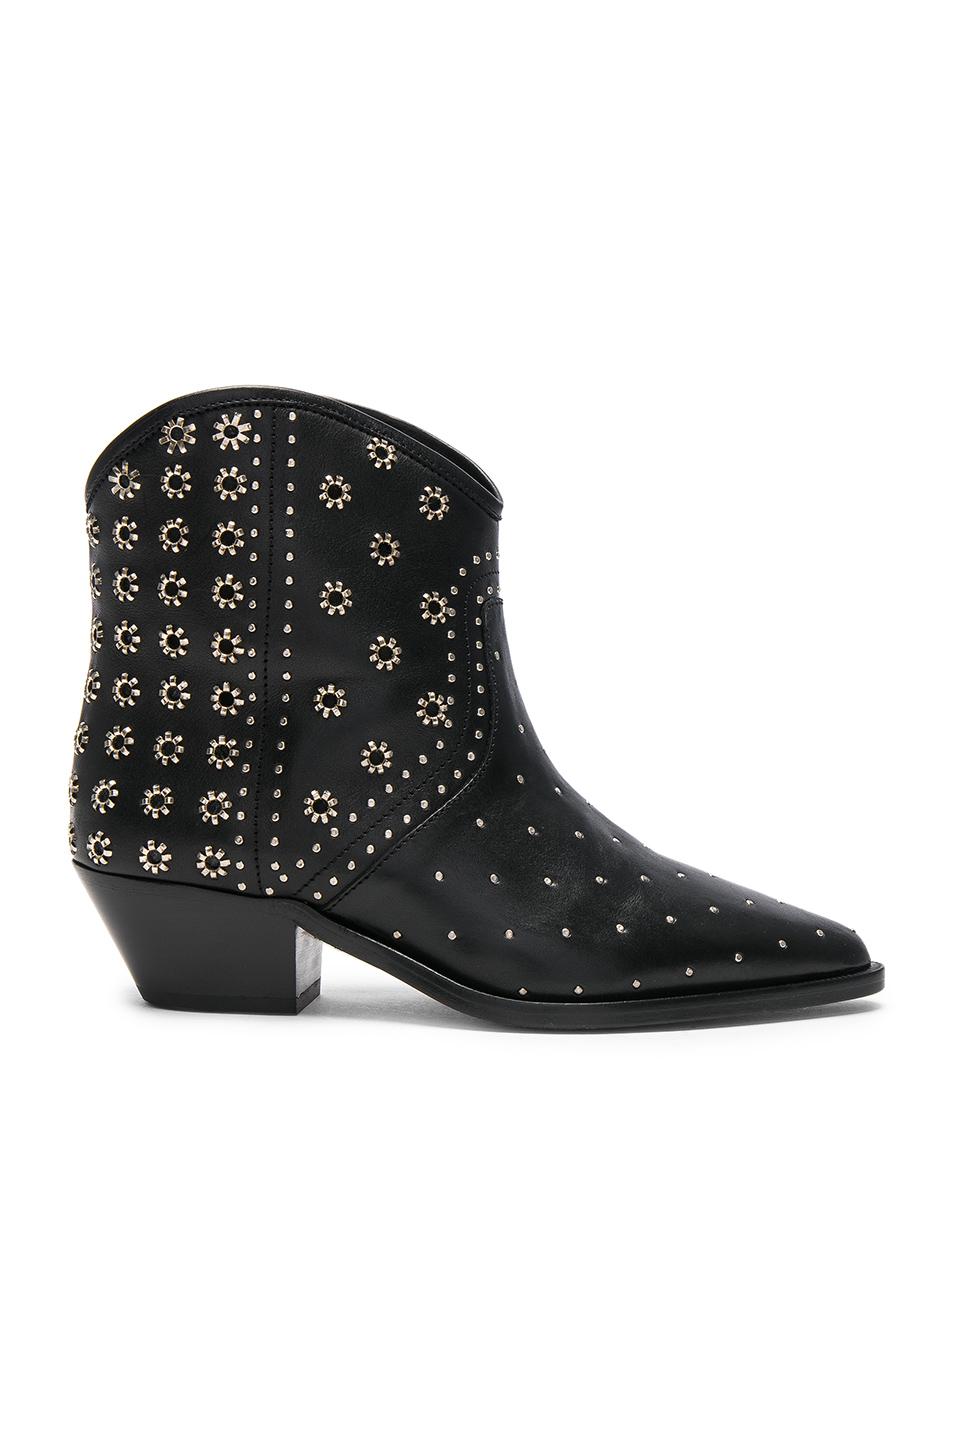 Isabel Marant Domya Studded Leather Ankle Boots in Black - Lyst